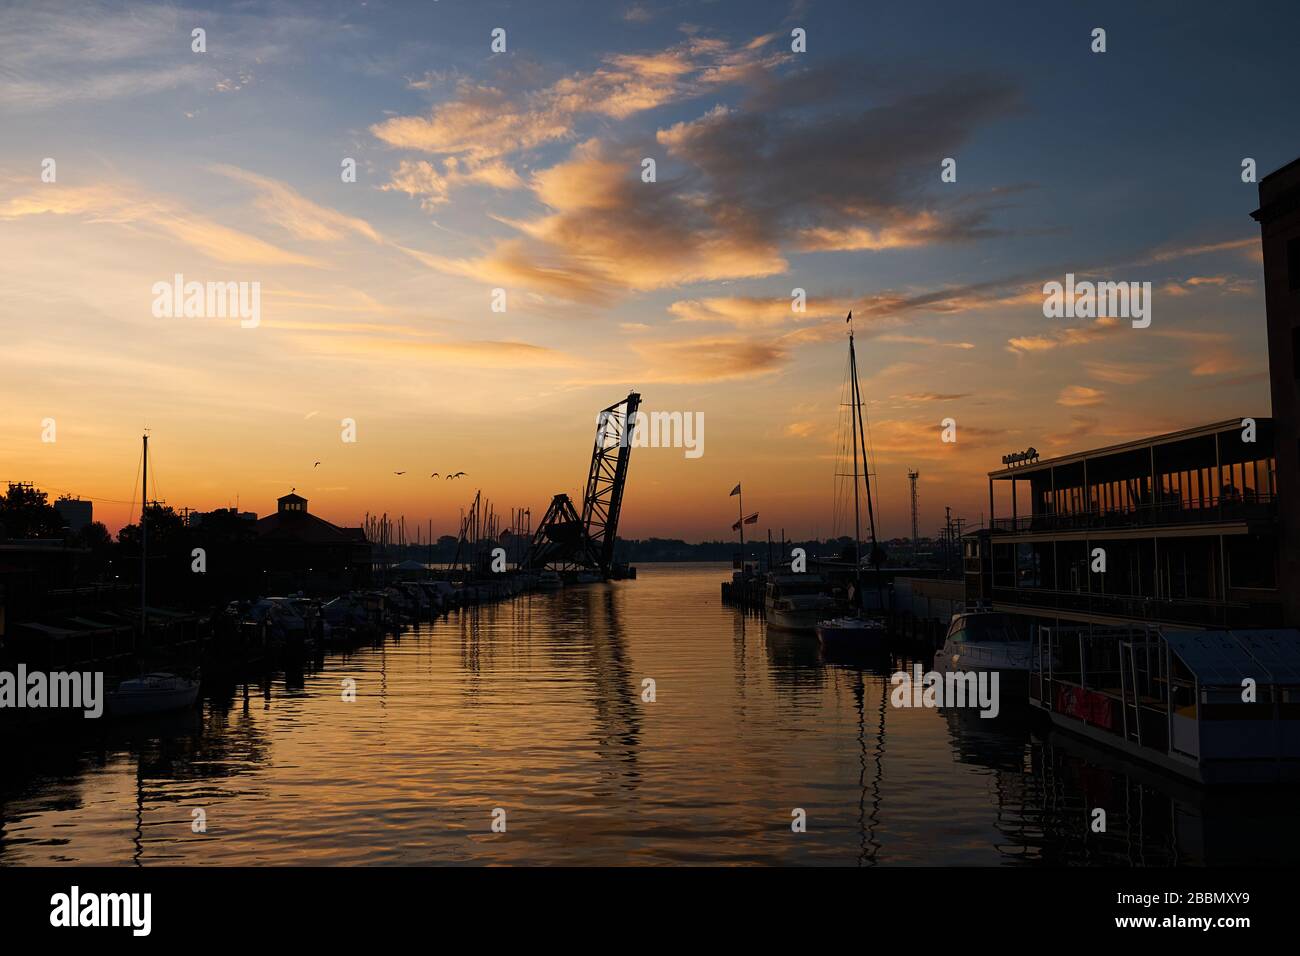 Beautiful sunrise over the Black River downtown Port huron, Michigan with view of city marina and train bridge. Stock Photo